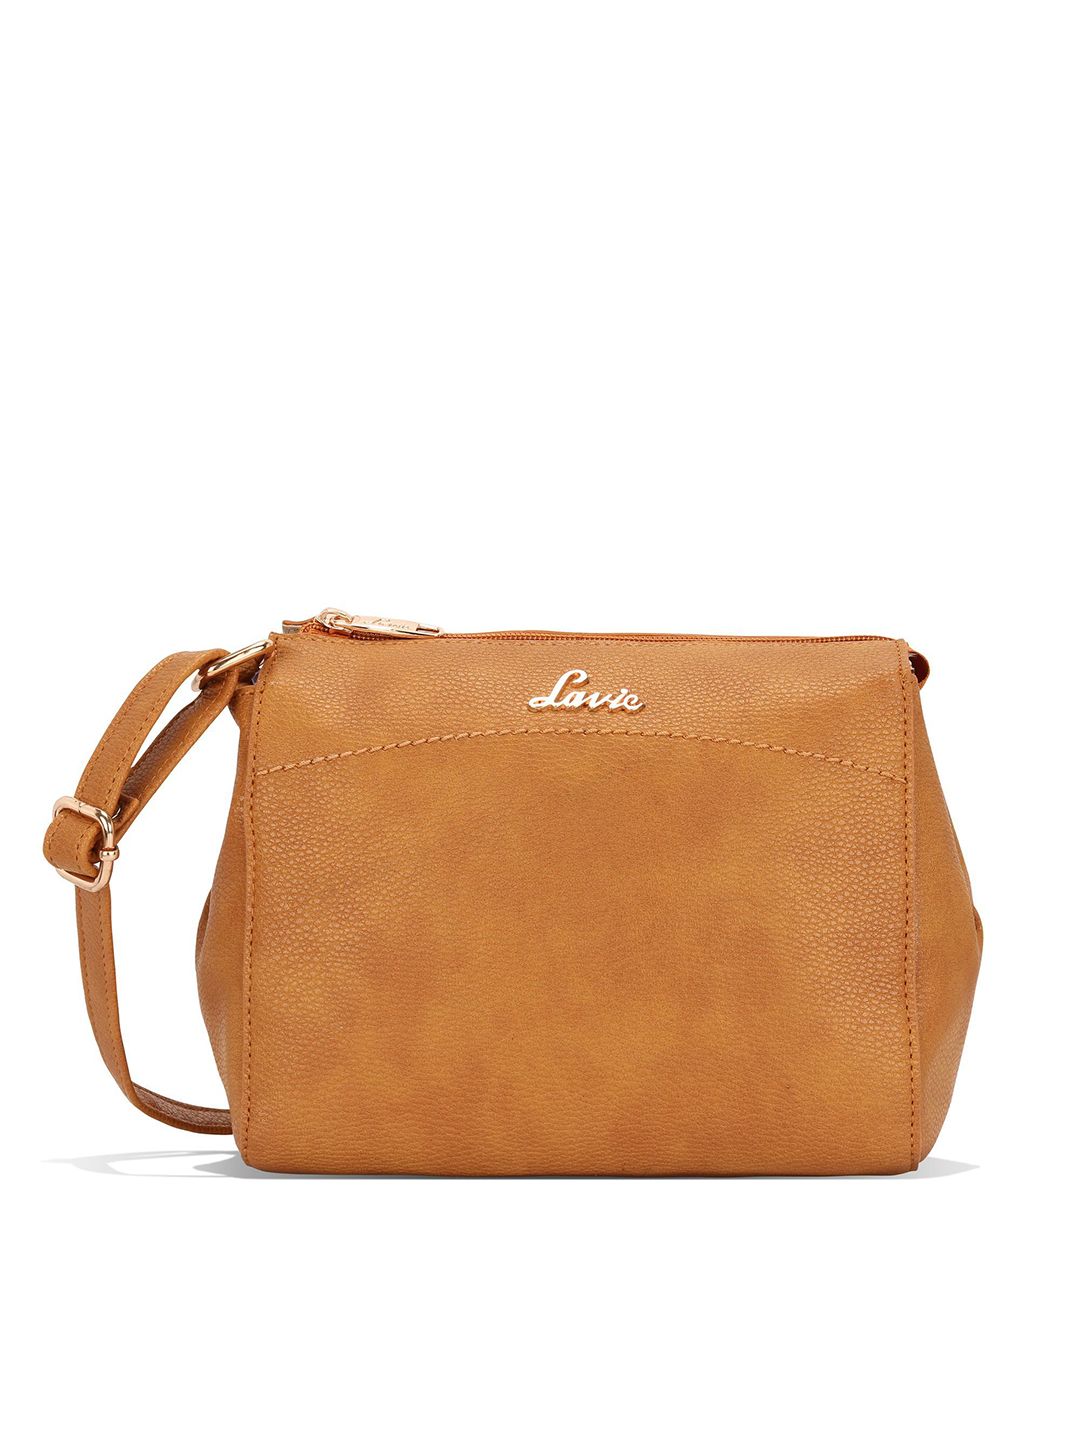 Lavie Yellow Solid Sling Bag Price in India